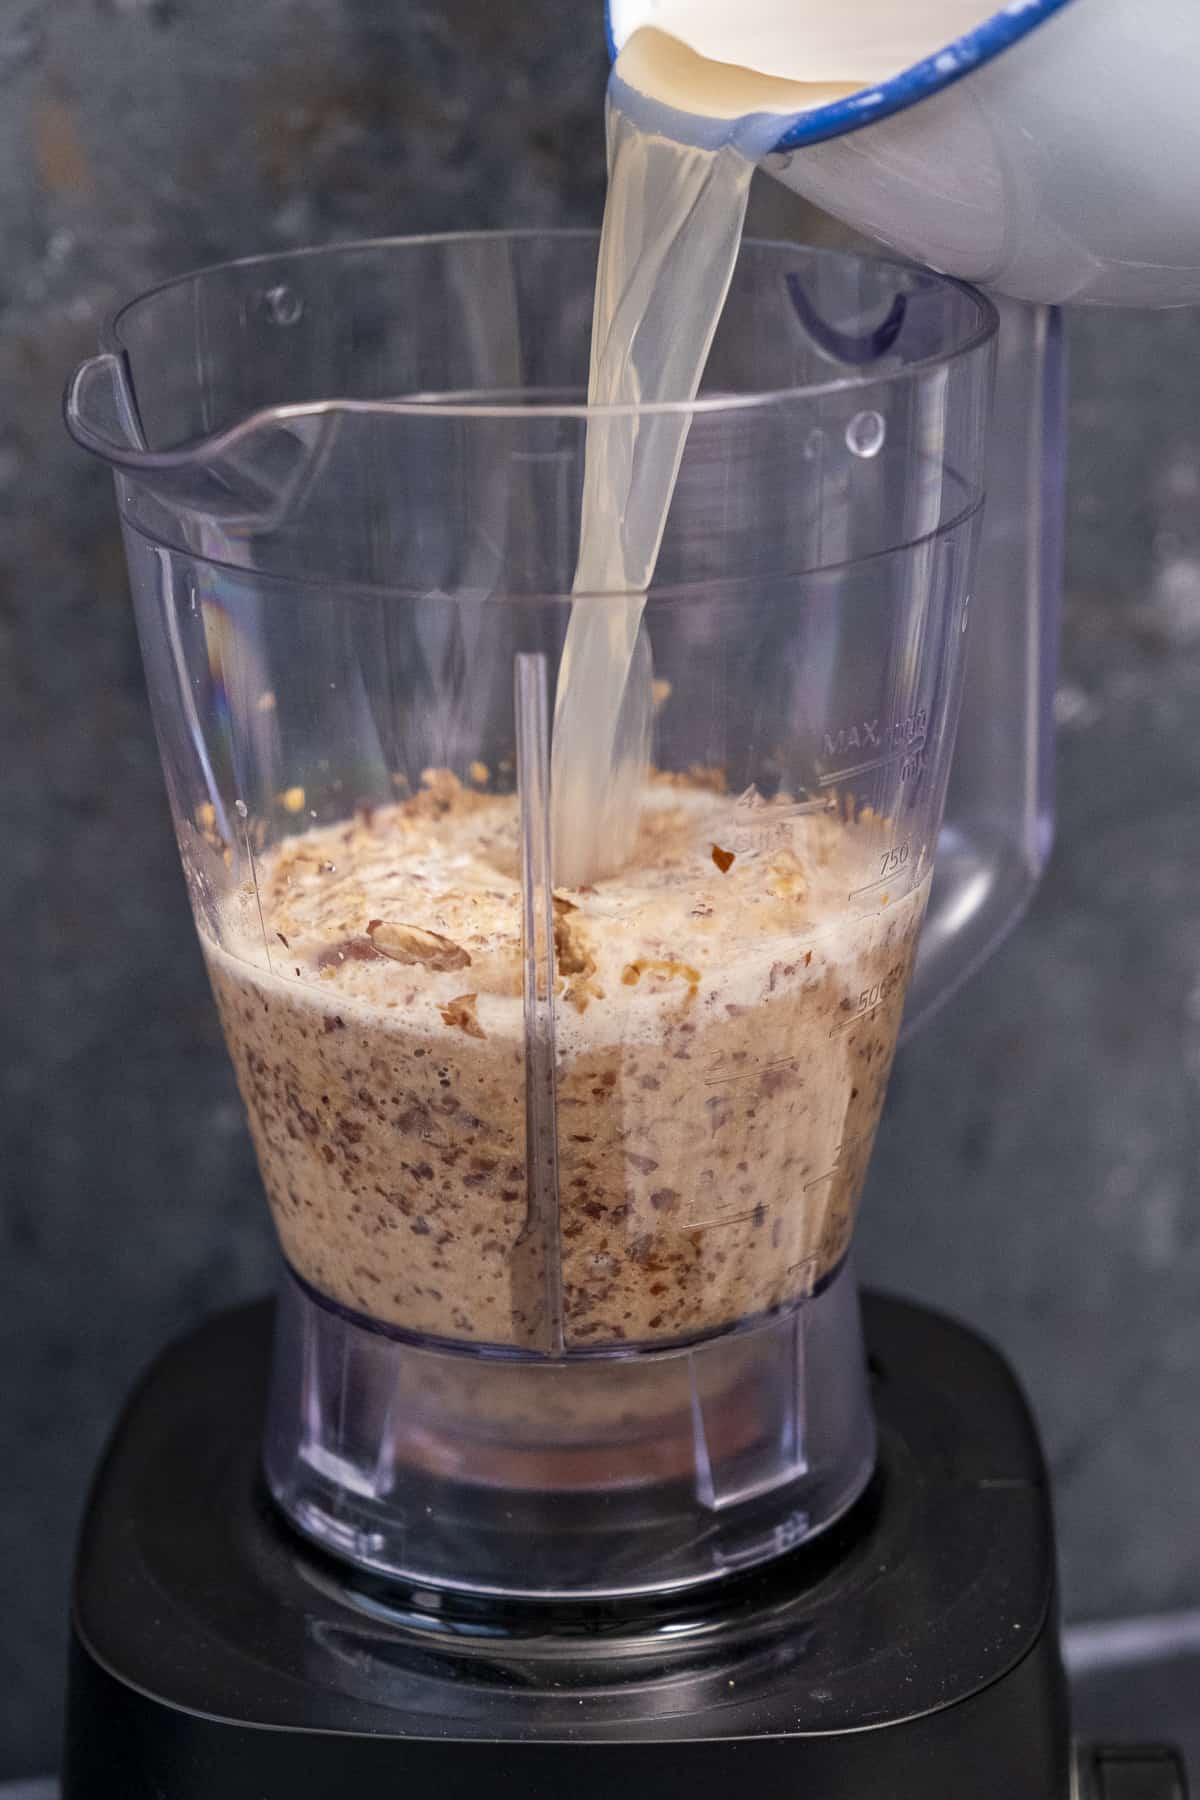 Water being poured over blended almonds in a blender.